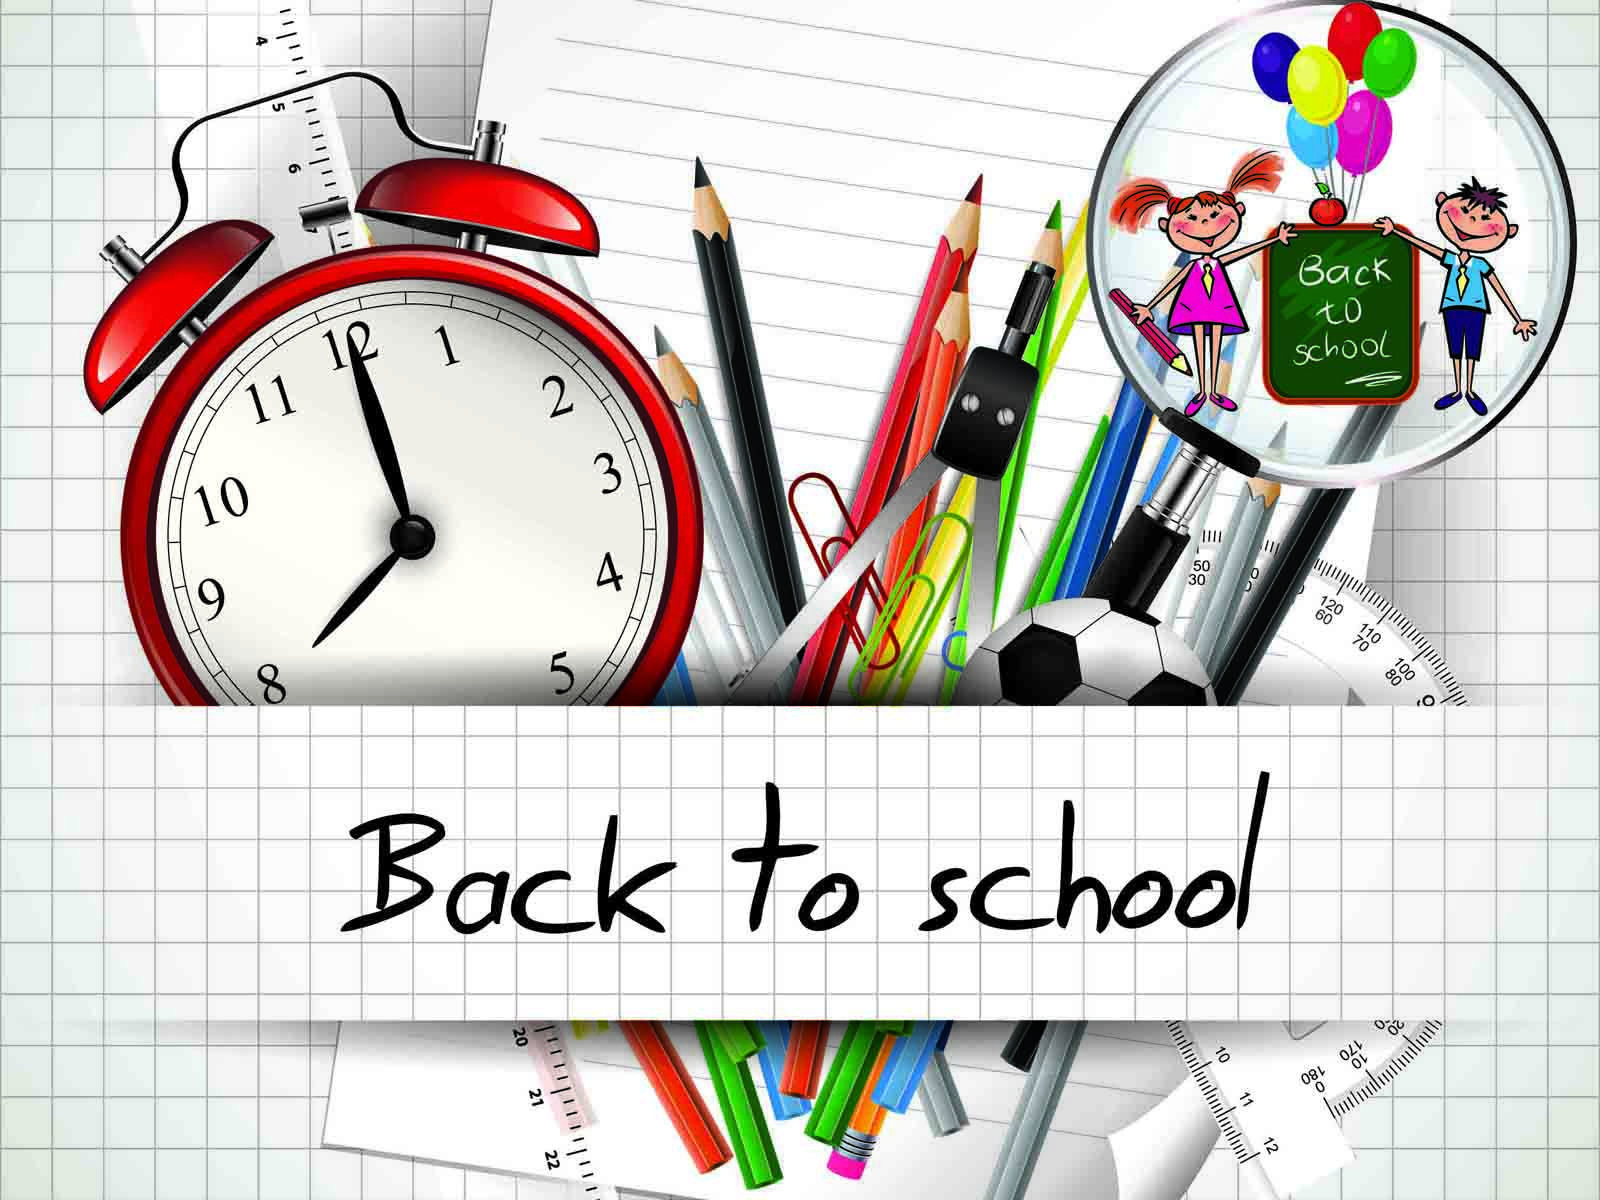 Back to School 800x600 pixel PPT Background for Powerpoint